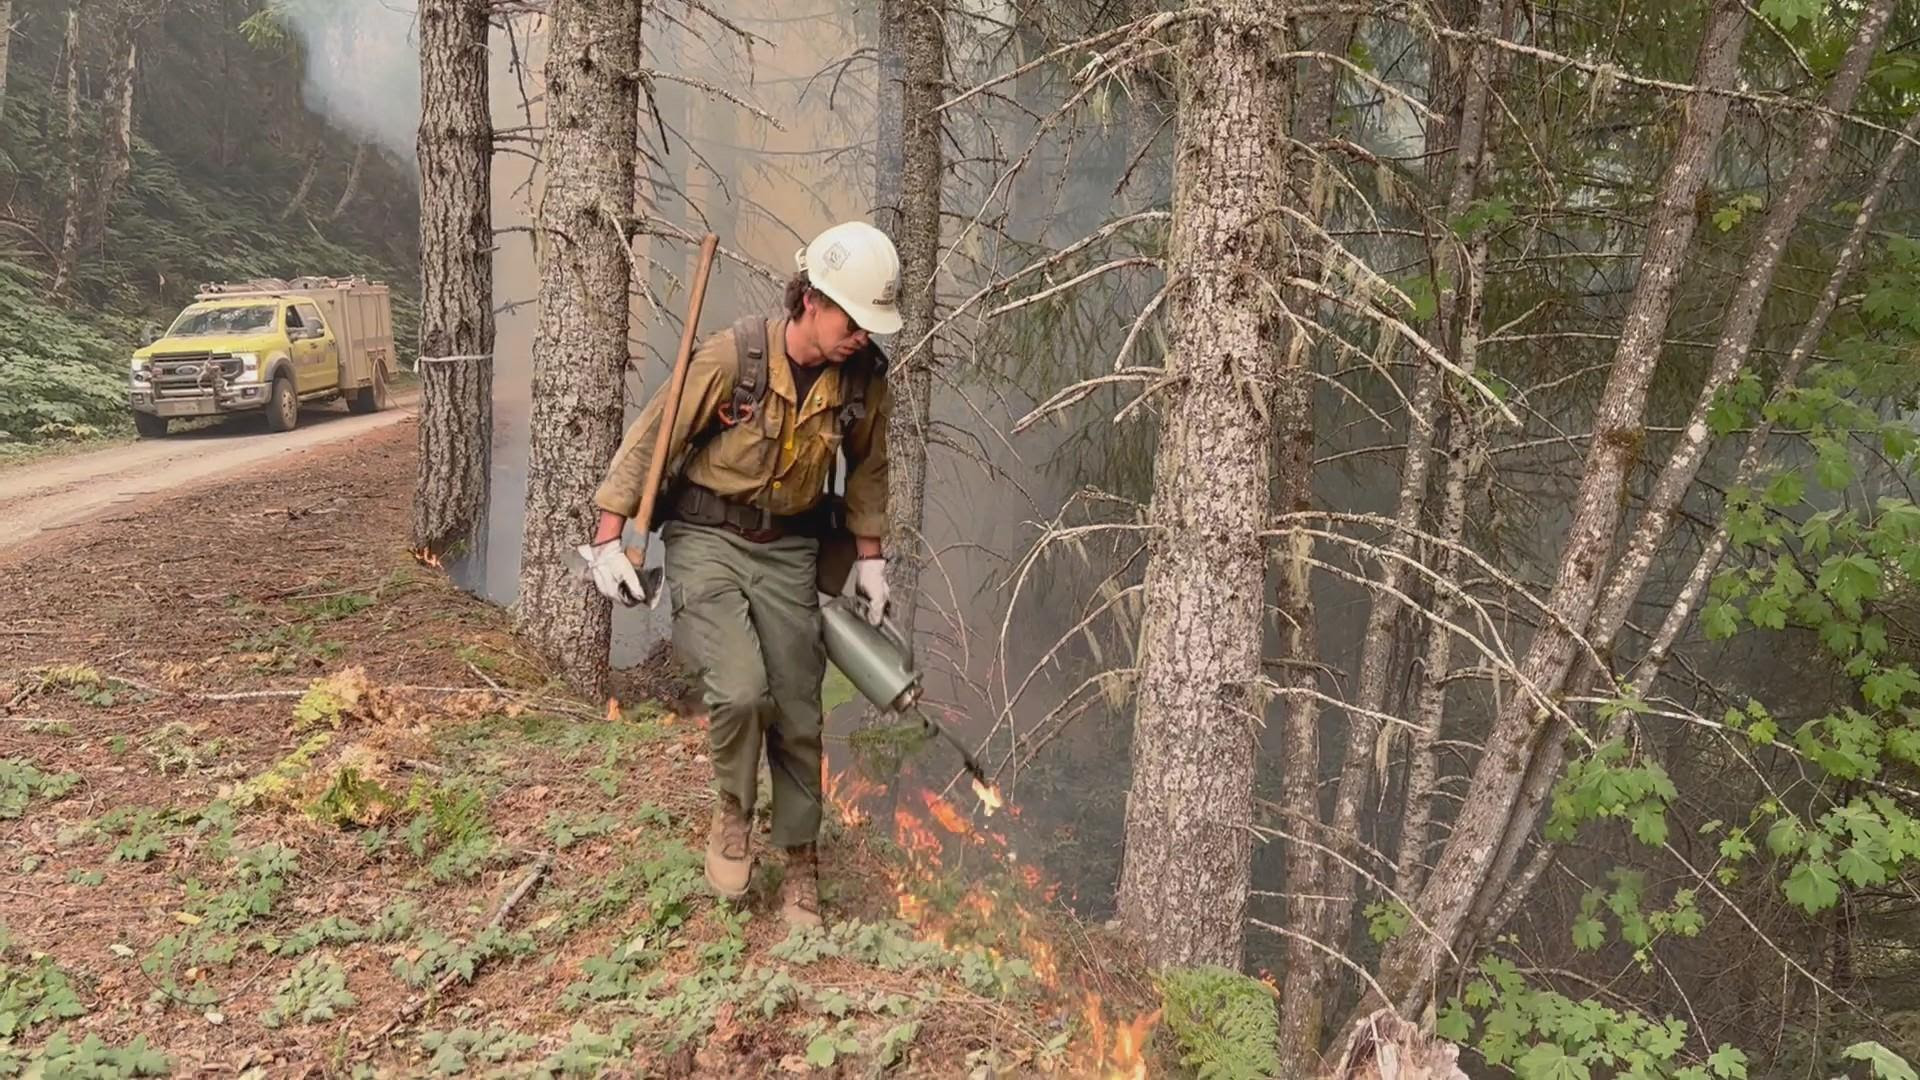 Person in hard hat with ax in one hand, using torch to ignite a controlled burn along tree line.